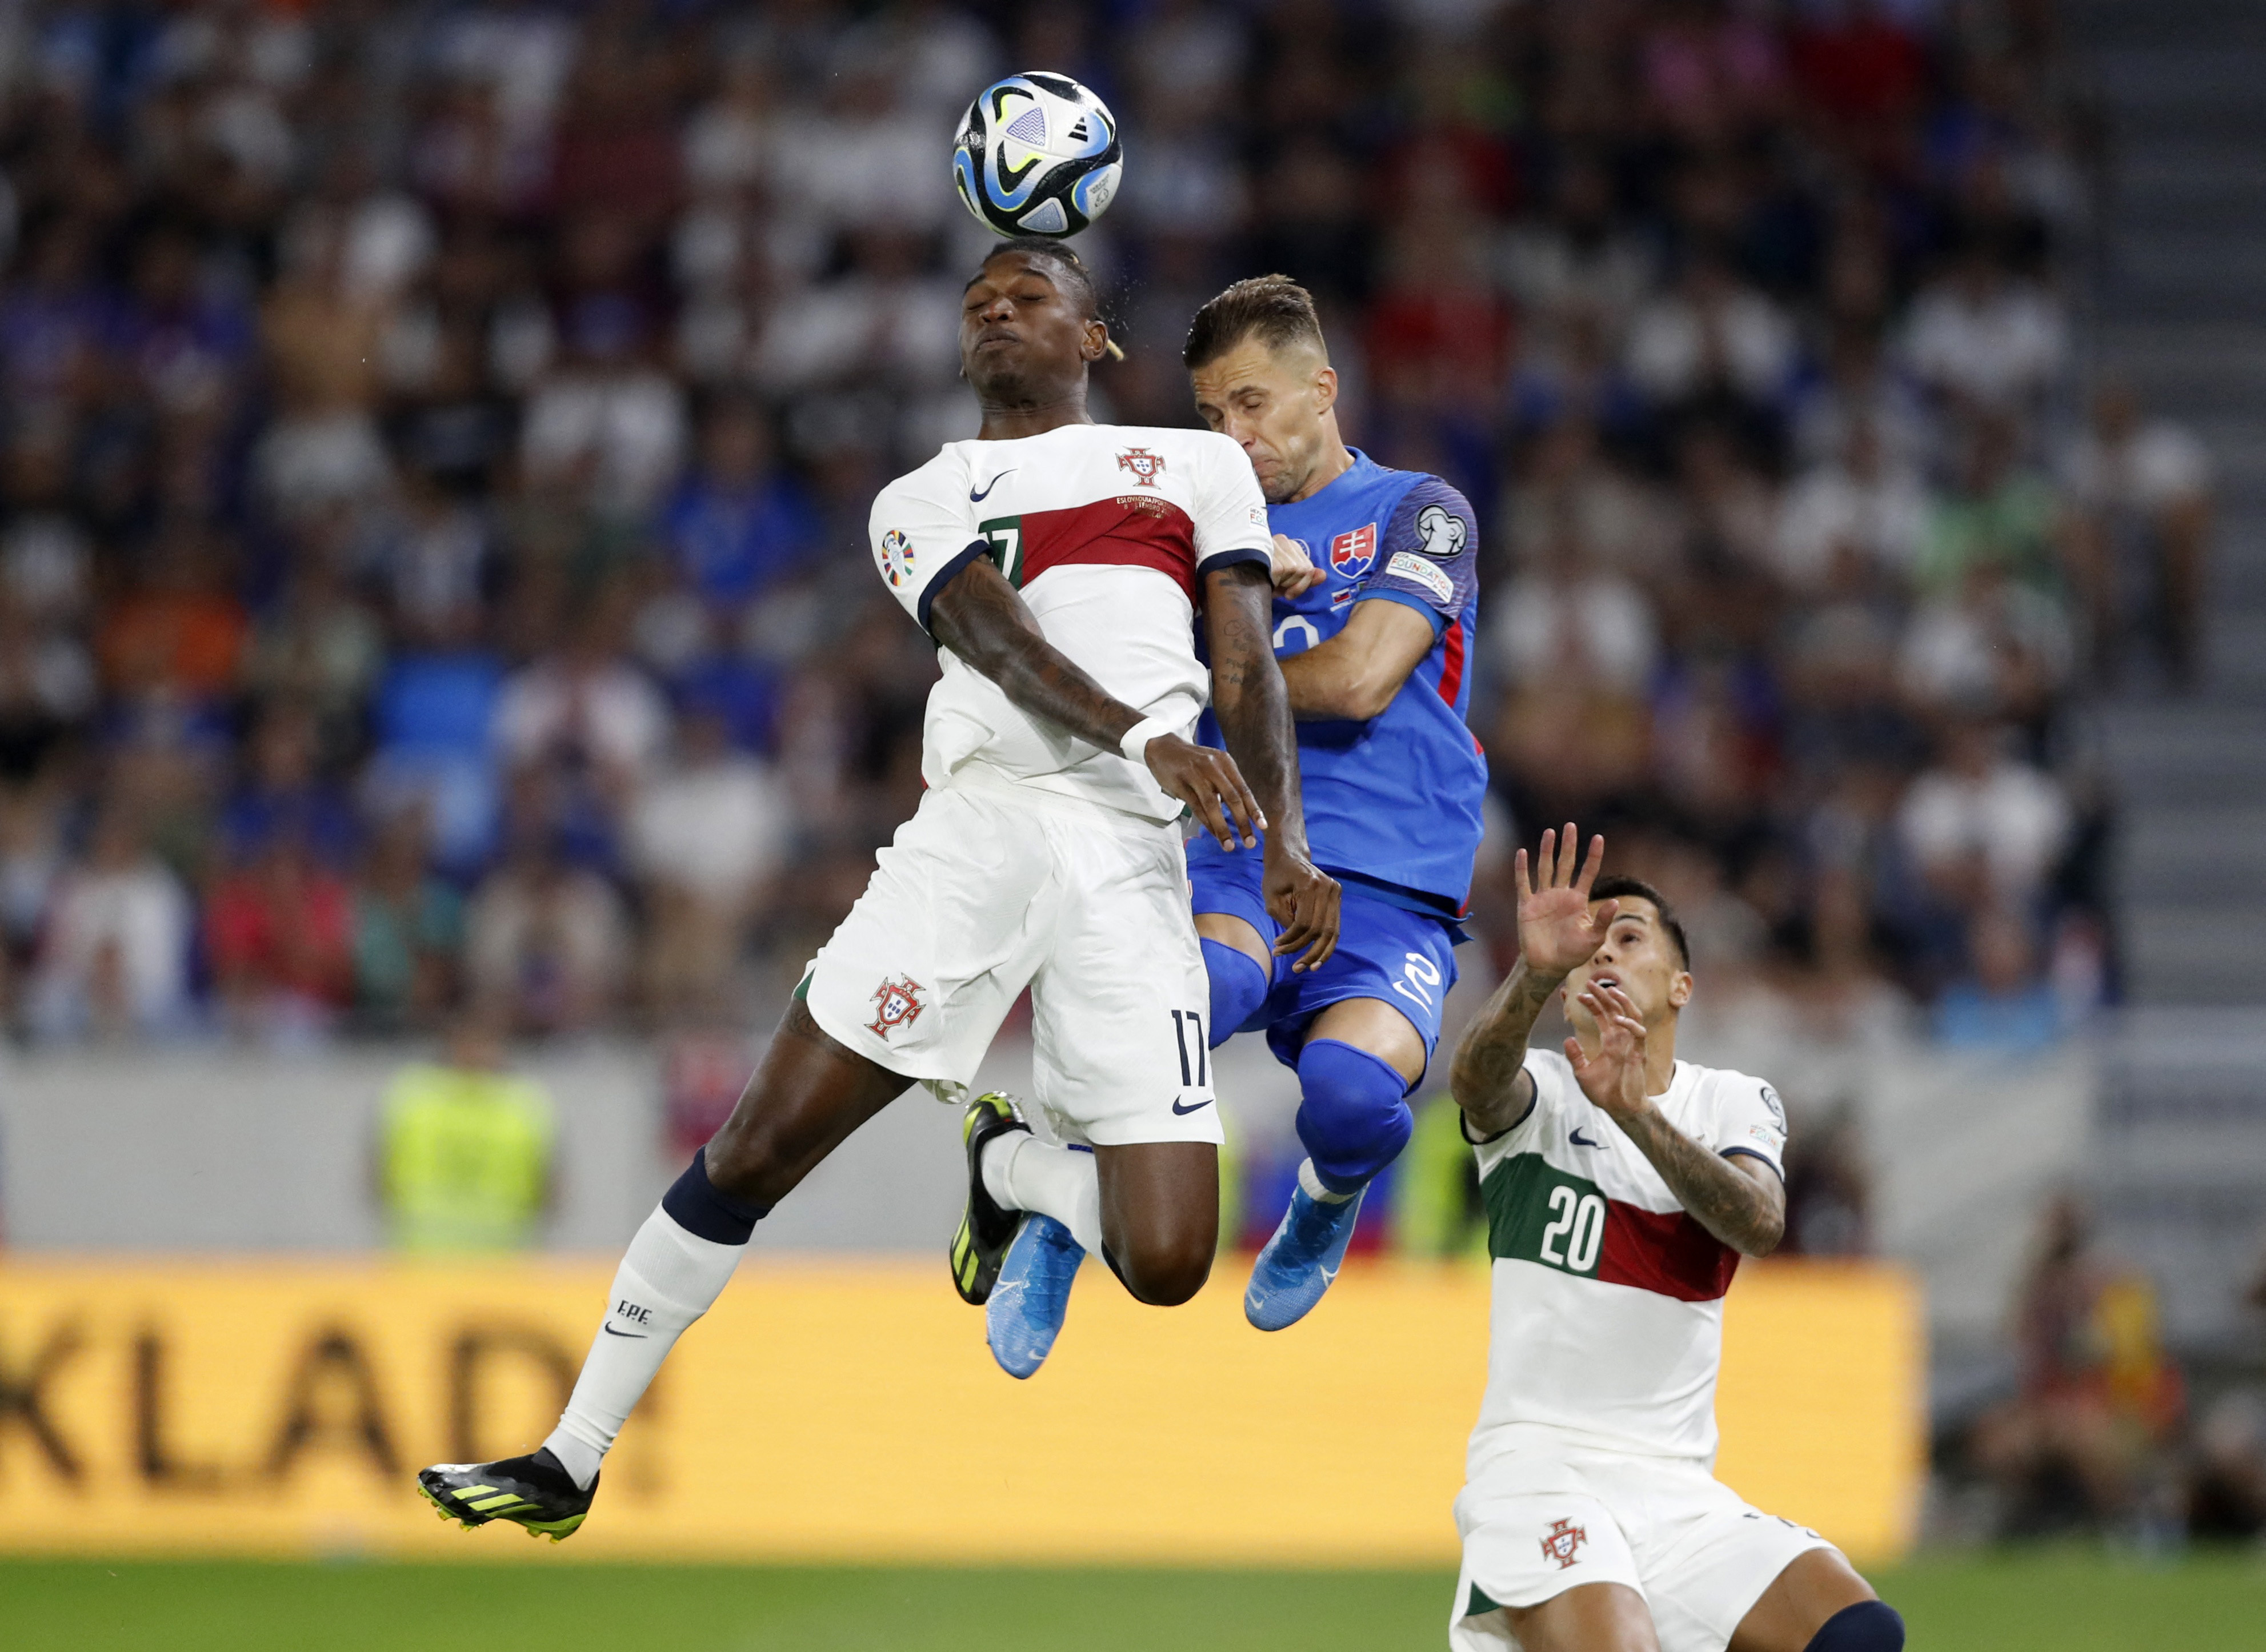 Fernandes earns Portugal 1-0 win over Slovakia in Euro qualifier Reuters